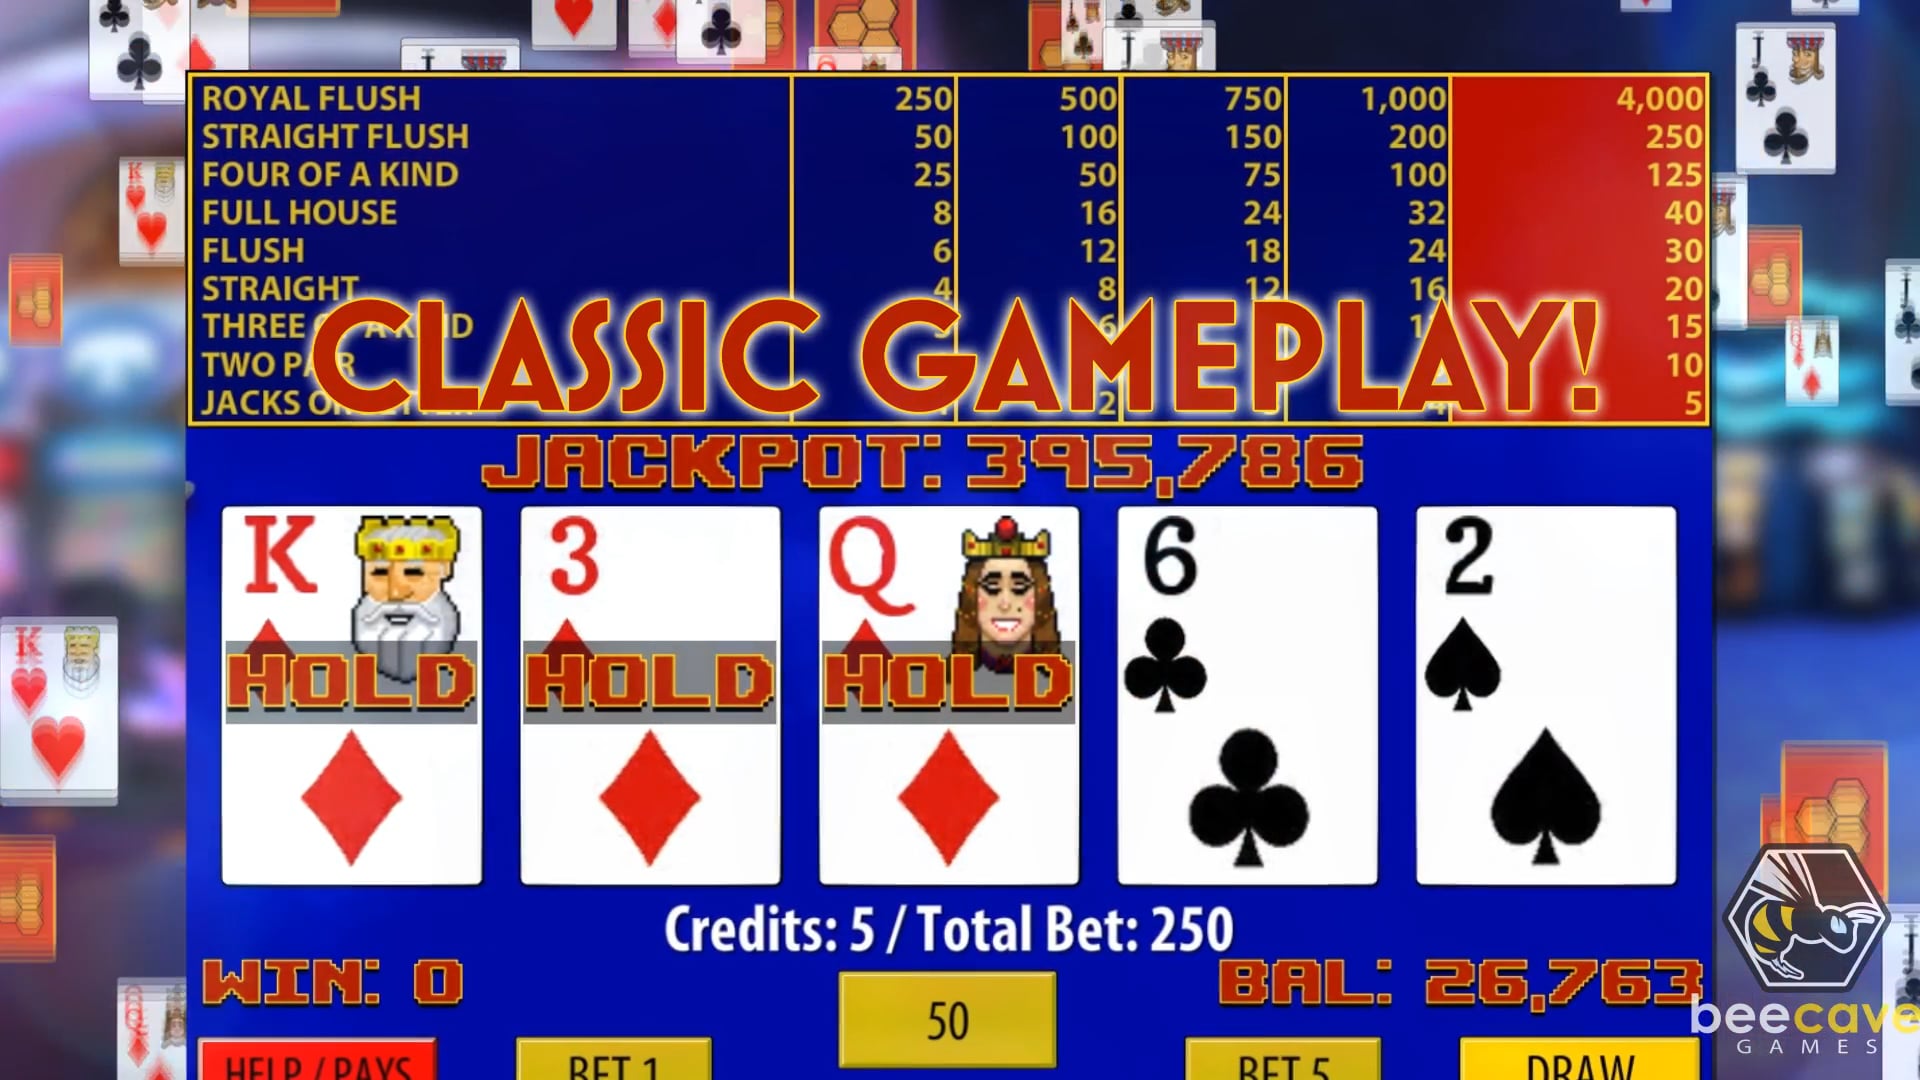 Beecave Games Video Poker Marketing Ad